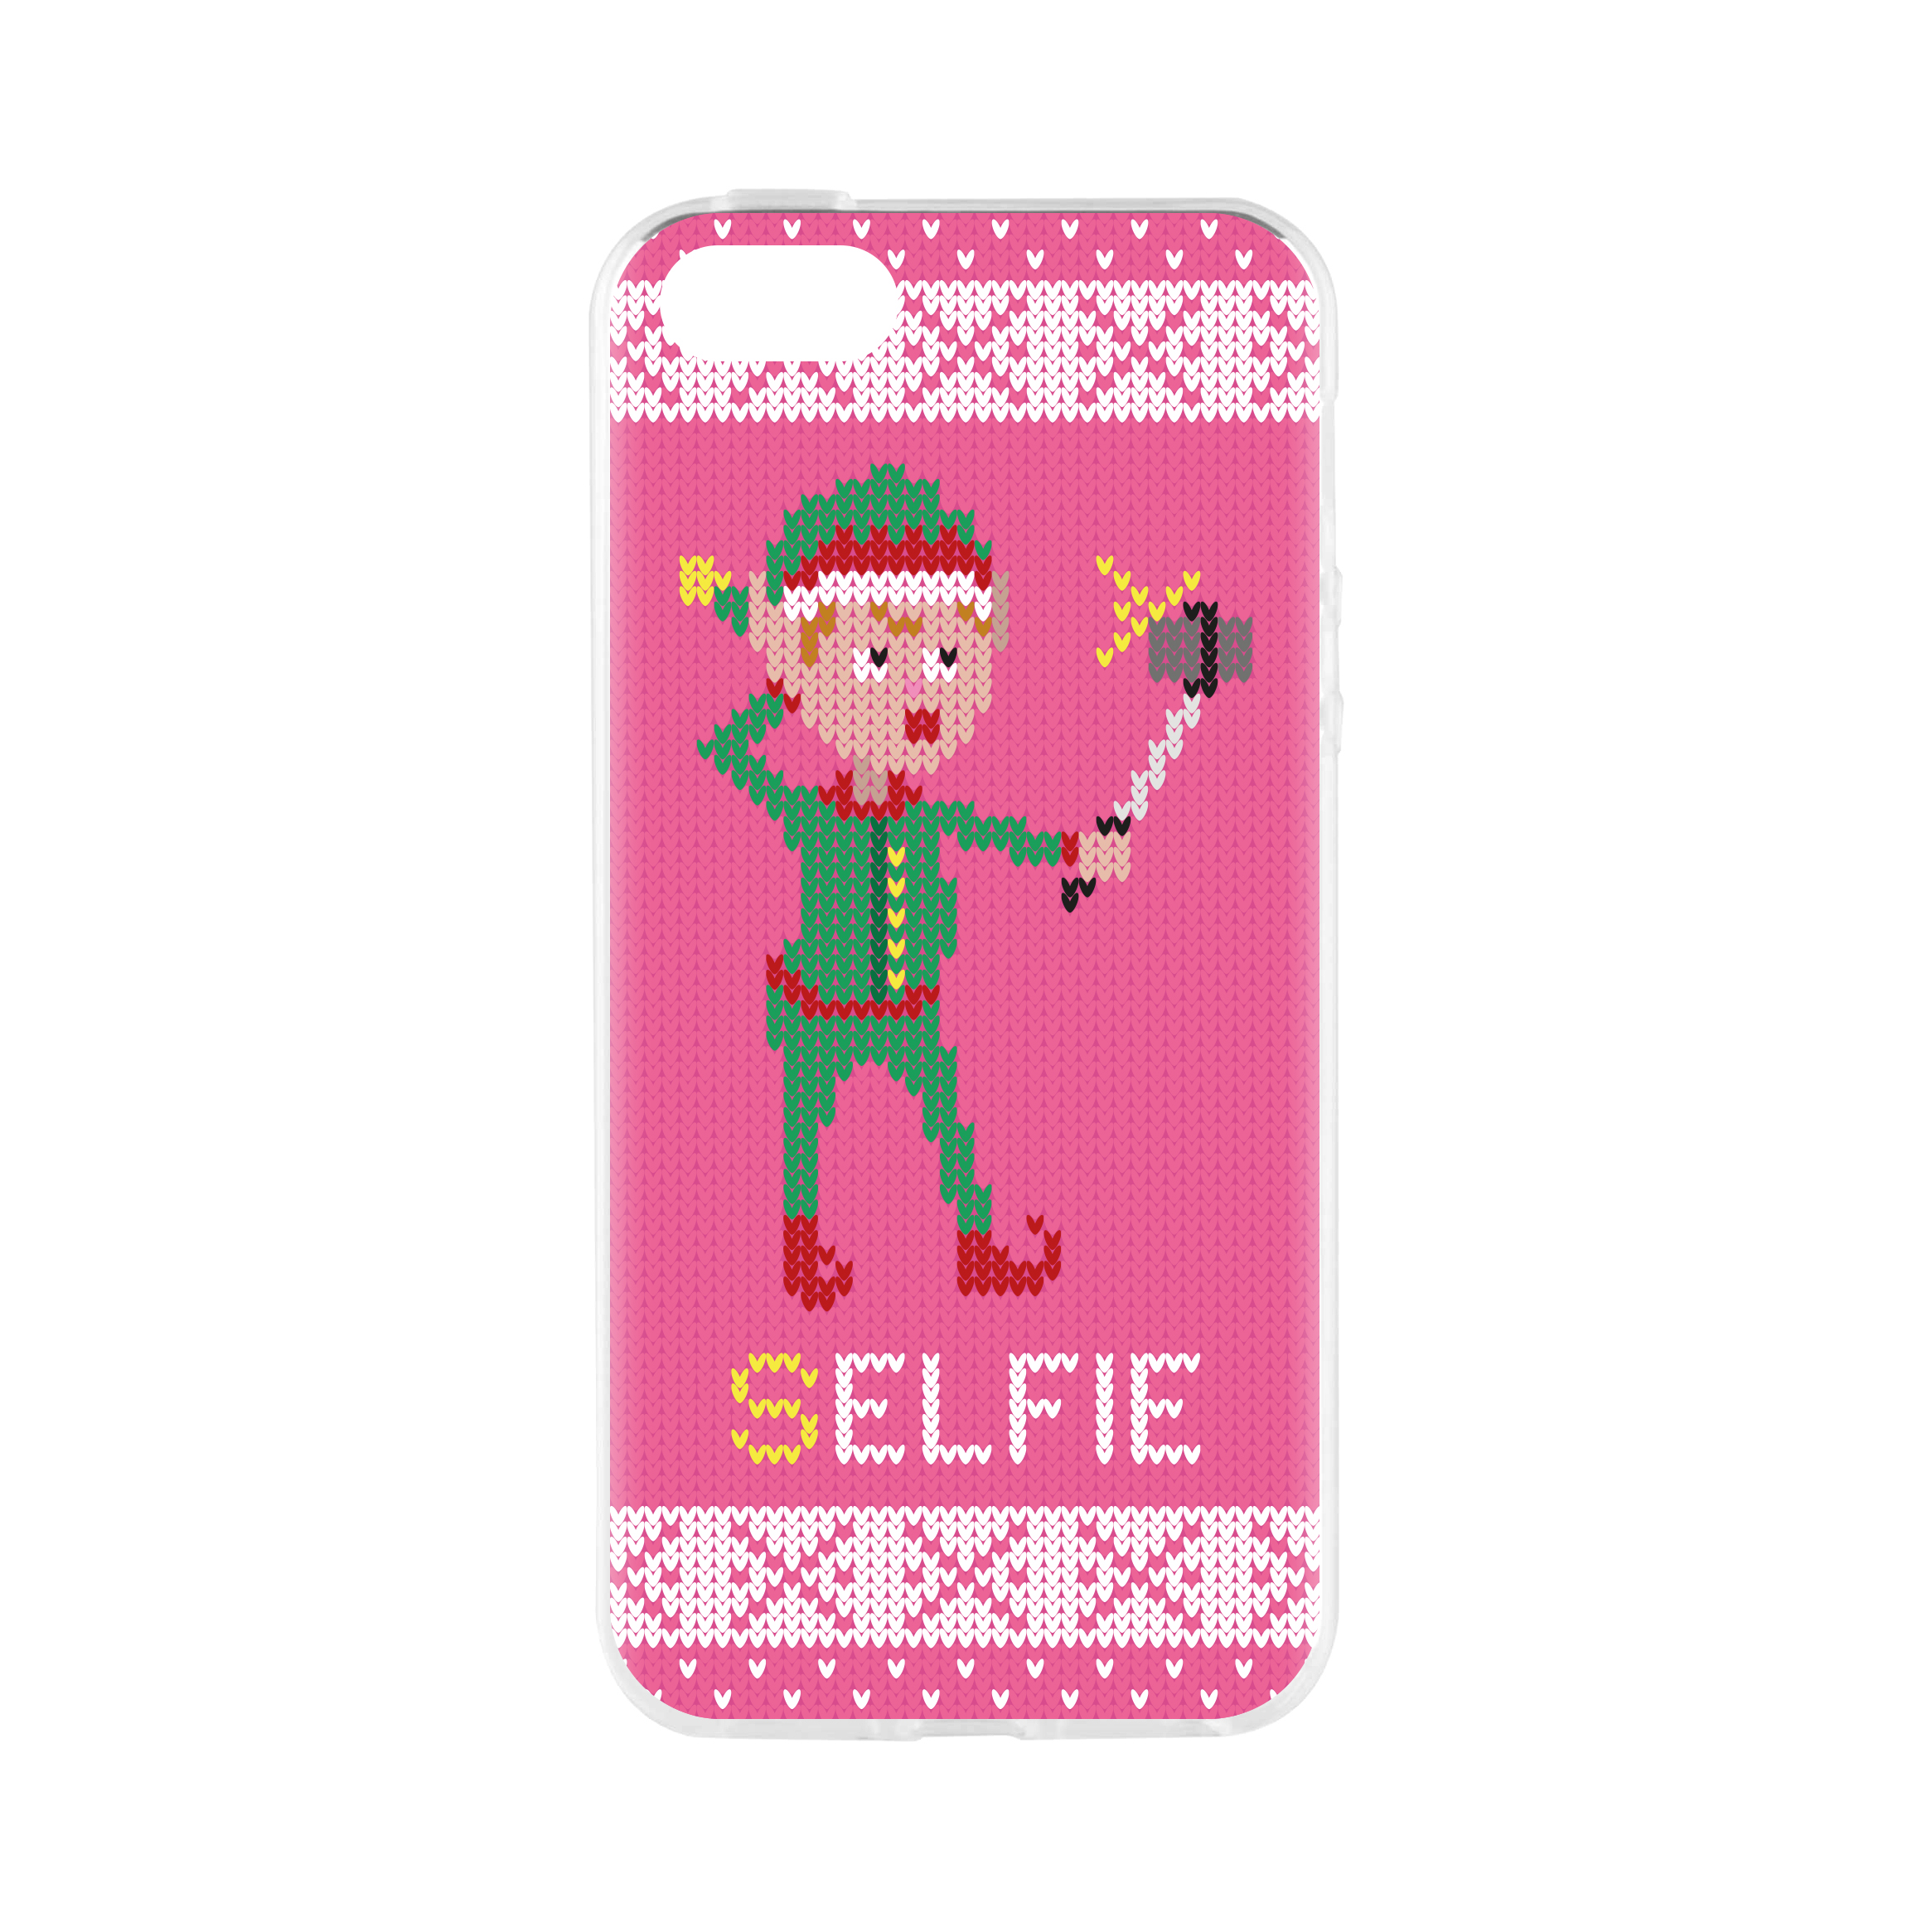 FLAVR Cardcase IPHONE Backcover, Selfie Xmas Ugly APPLE, Elfie, Sweater 5/5S/SE, COLOURFUL